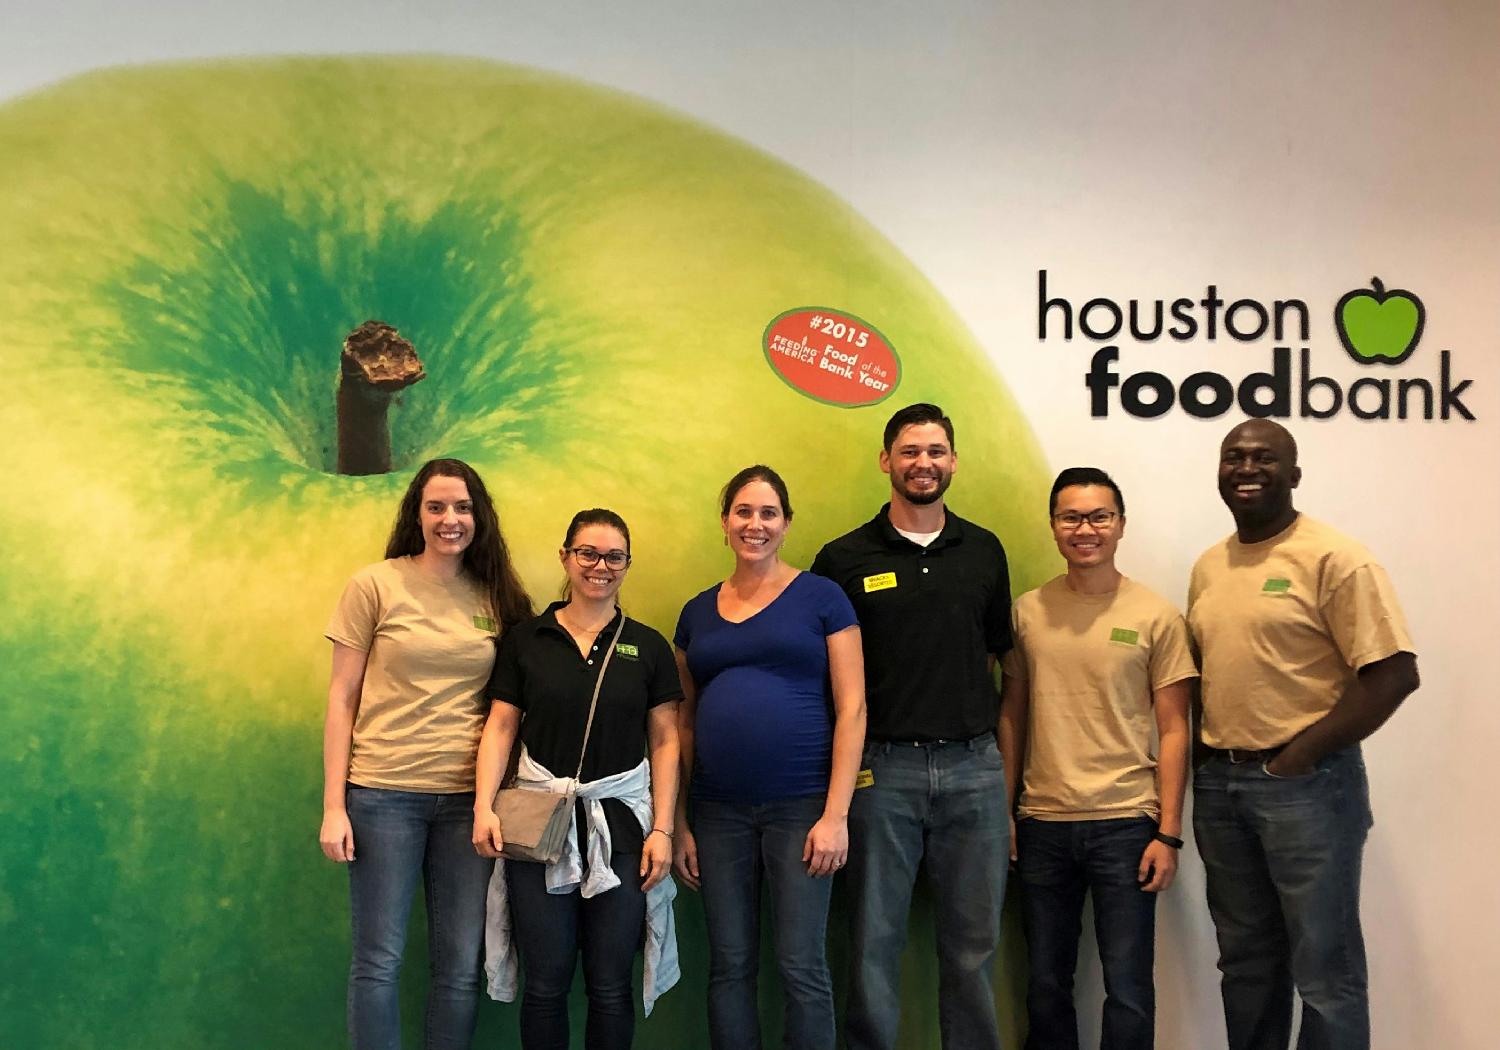 HR Green Houston team members helped a local food bank sort more than 19,000 pounds of food for families in need.